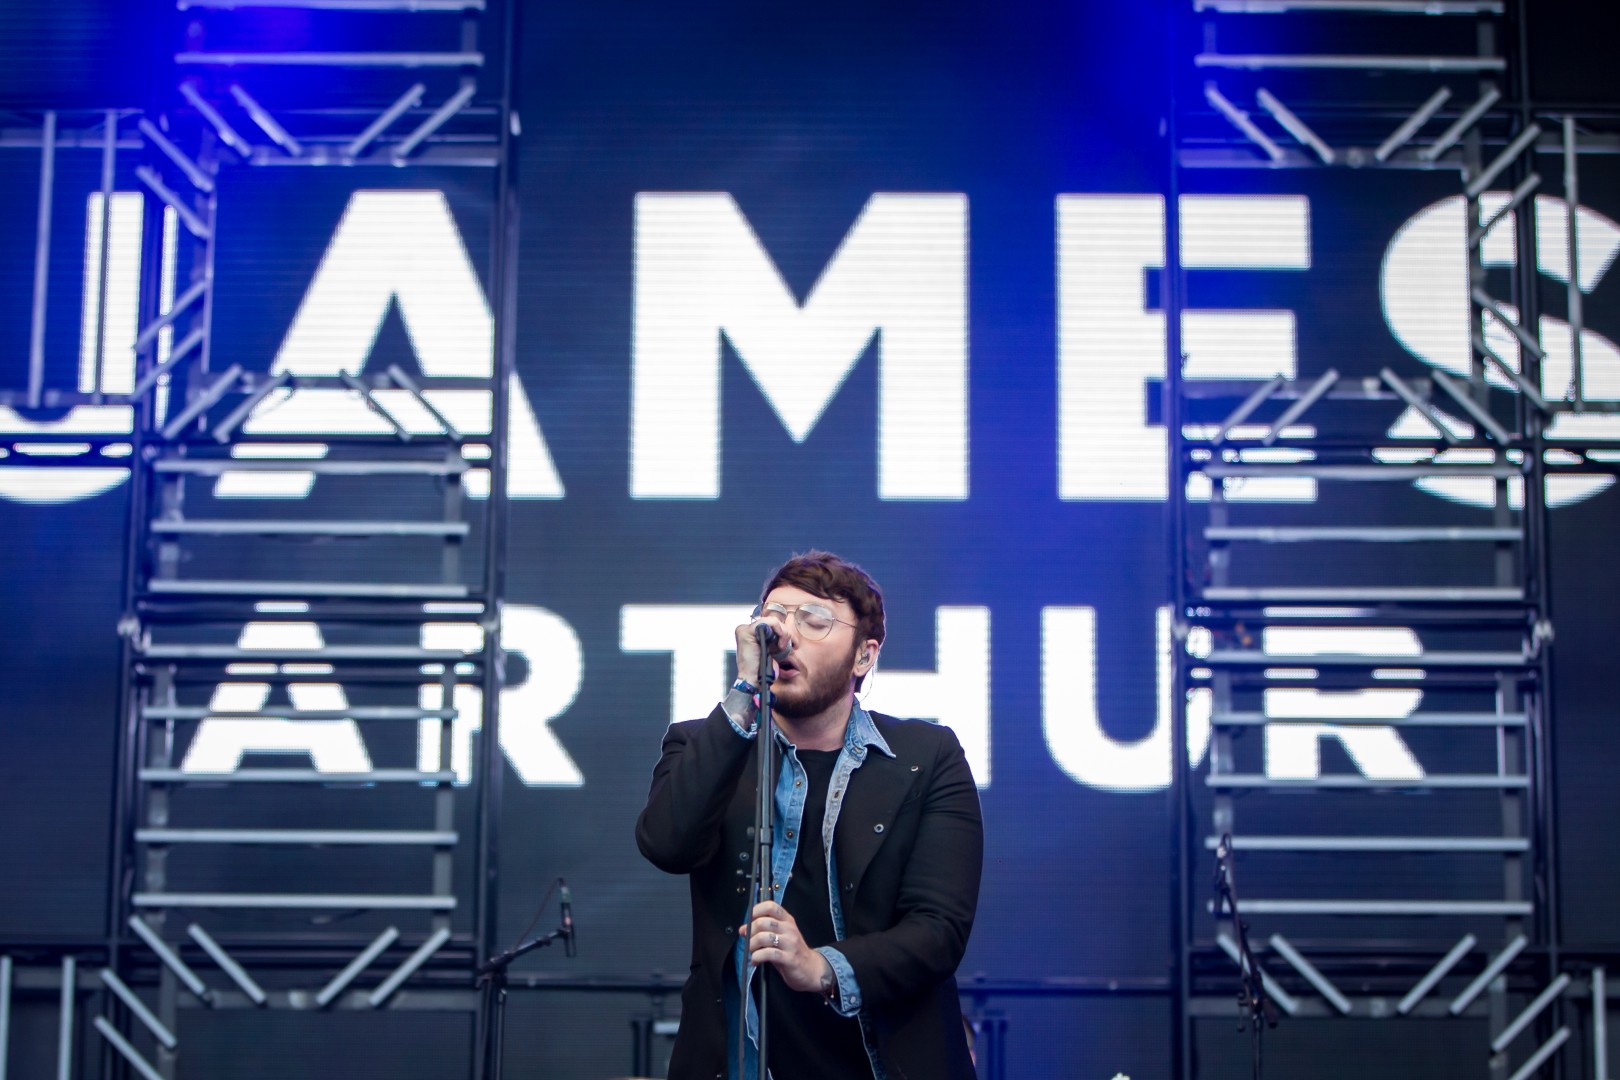 James Arthur at Cluj Arena in Cluj-Napoca on August 4, 2016 (be08f3cc4e)